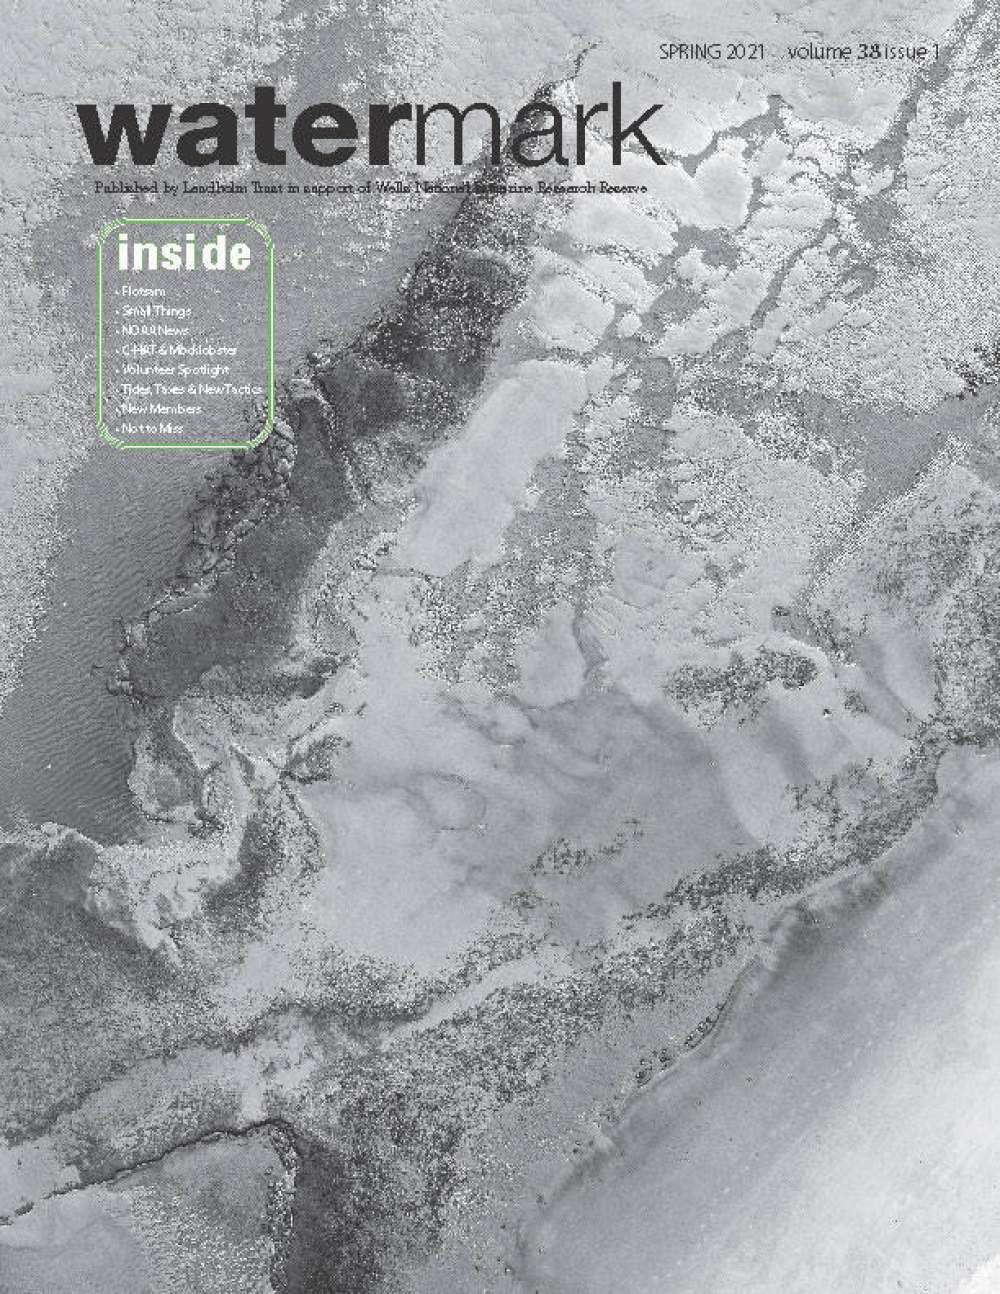 Cover from Watermark, Spring 2021